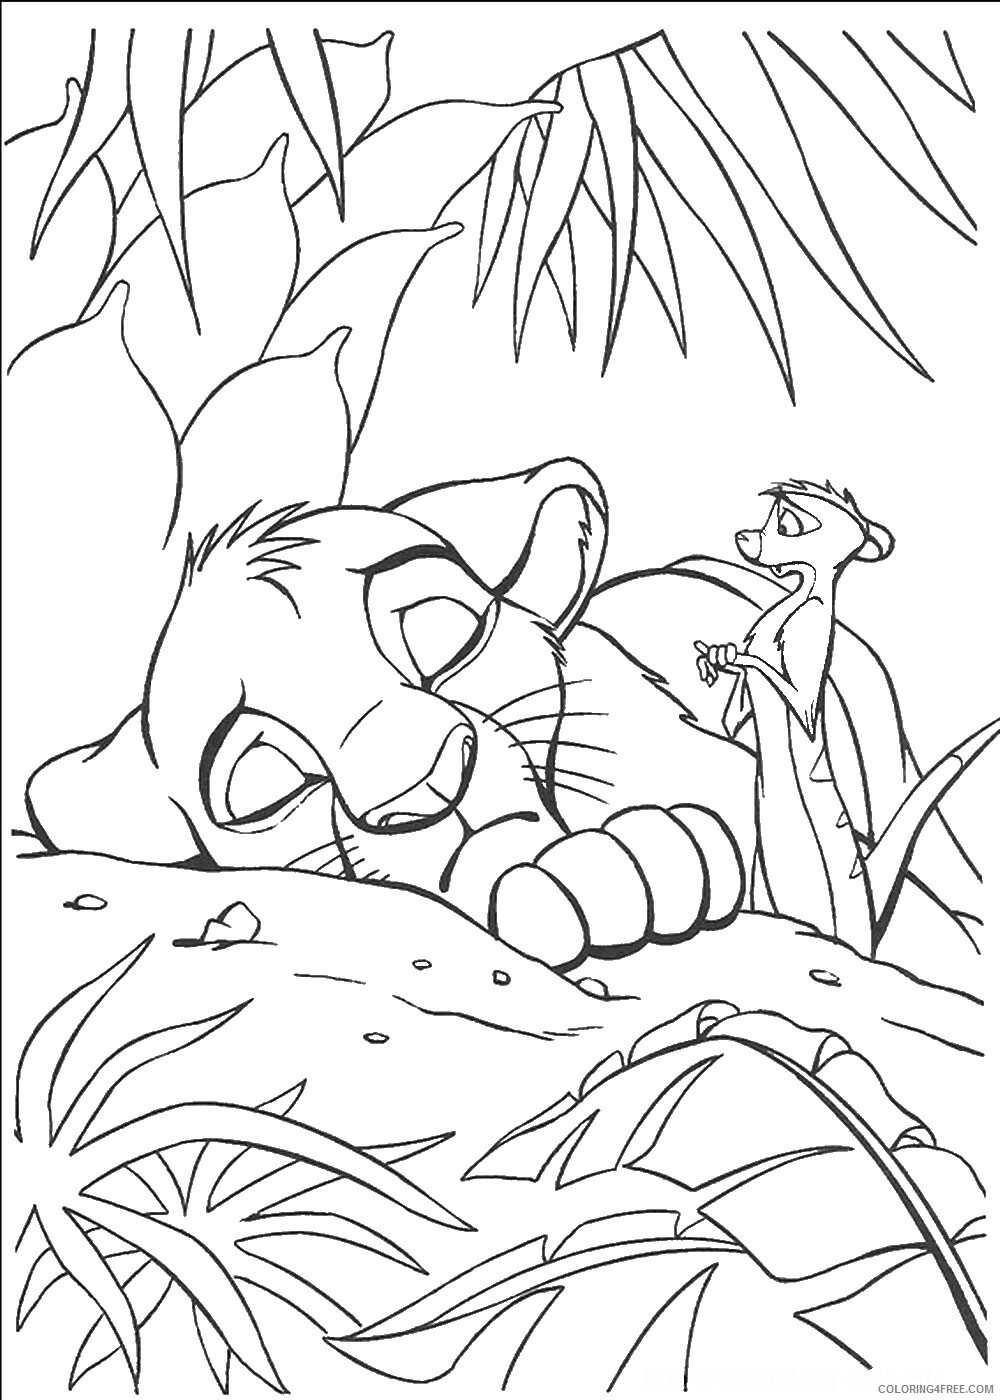 The Lion King Coloring Pages TV Film lionking_73 Printable 2020 09189 Coloring4free